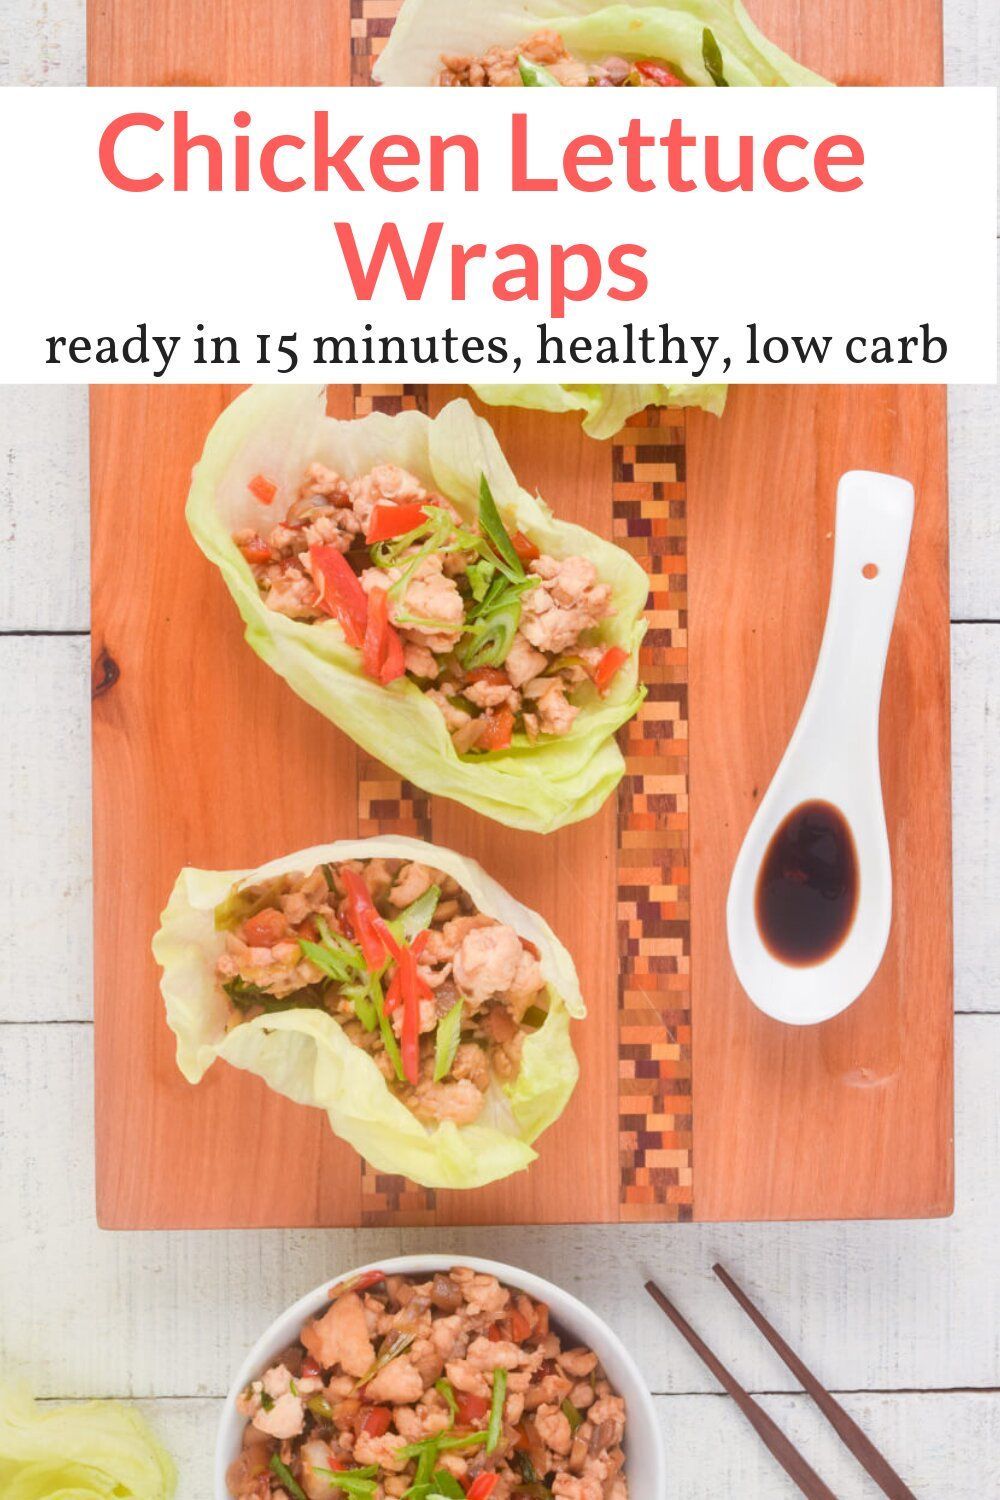 18 healthy recipes Wraps appetizers ideas